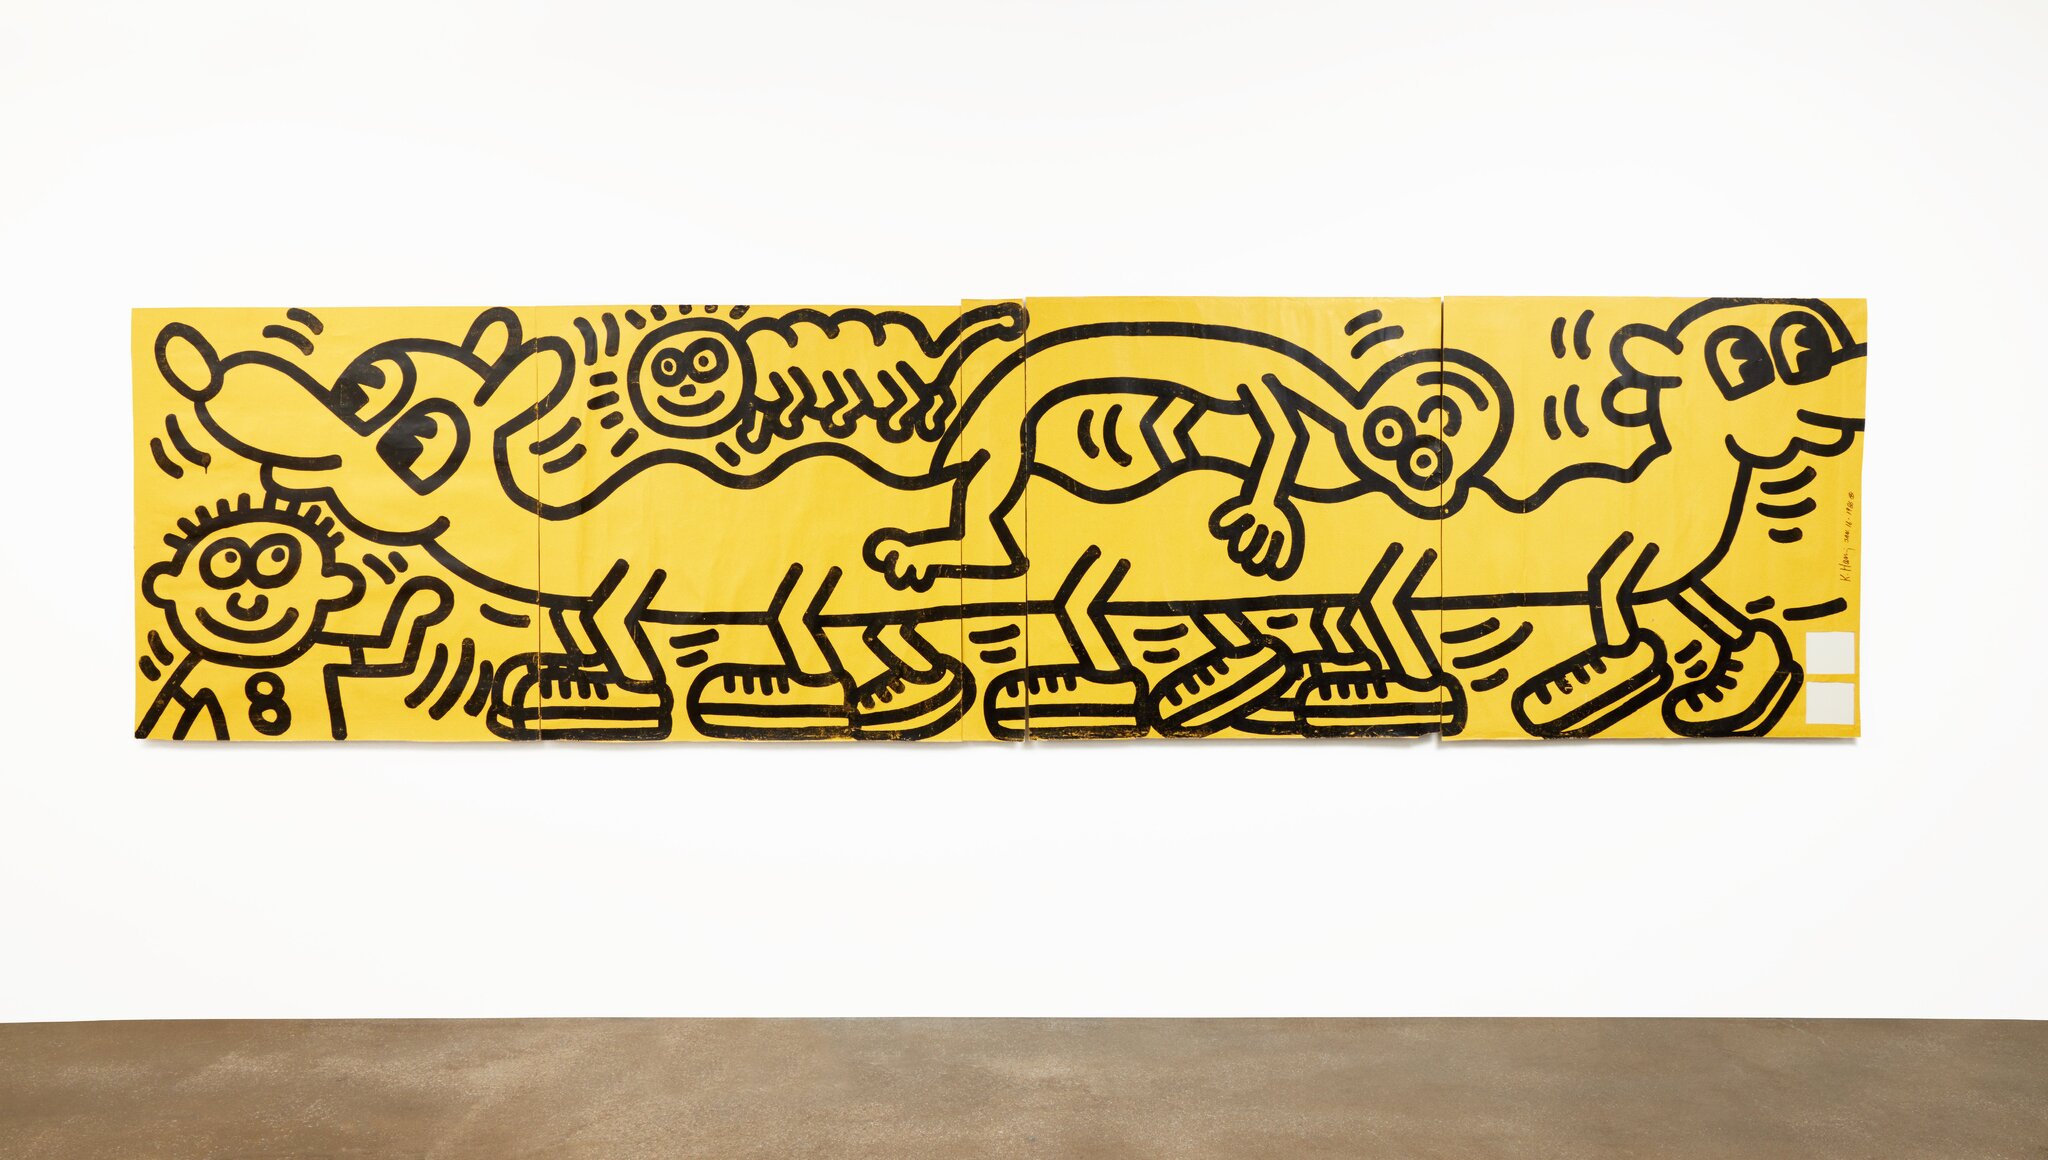 Keith Haring Mural Auctioned for $945,000 - A portion of the proceeds from the sale of the mural, rediscovered after 30 years, will return to Mount Sinai Kravis Childrenâ€™s Hospital, where the mural was originally housed.